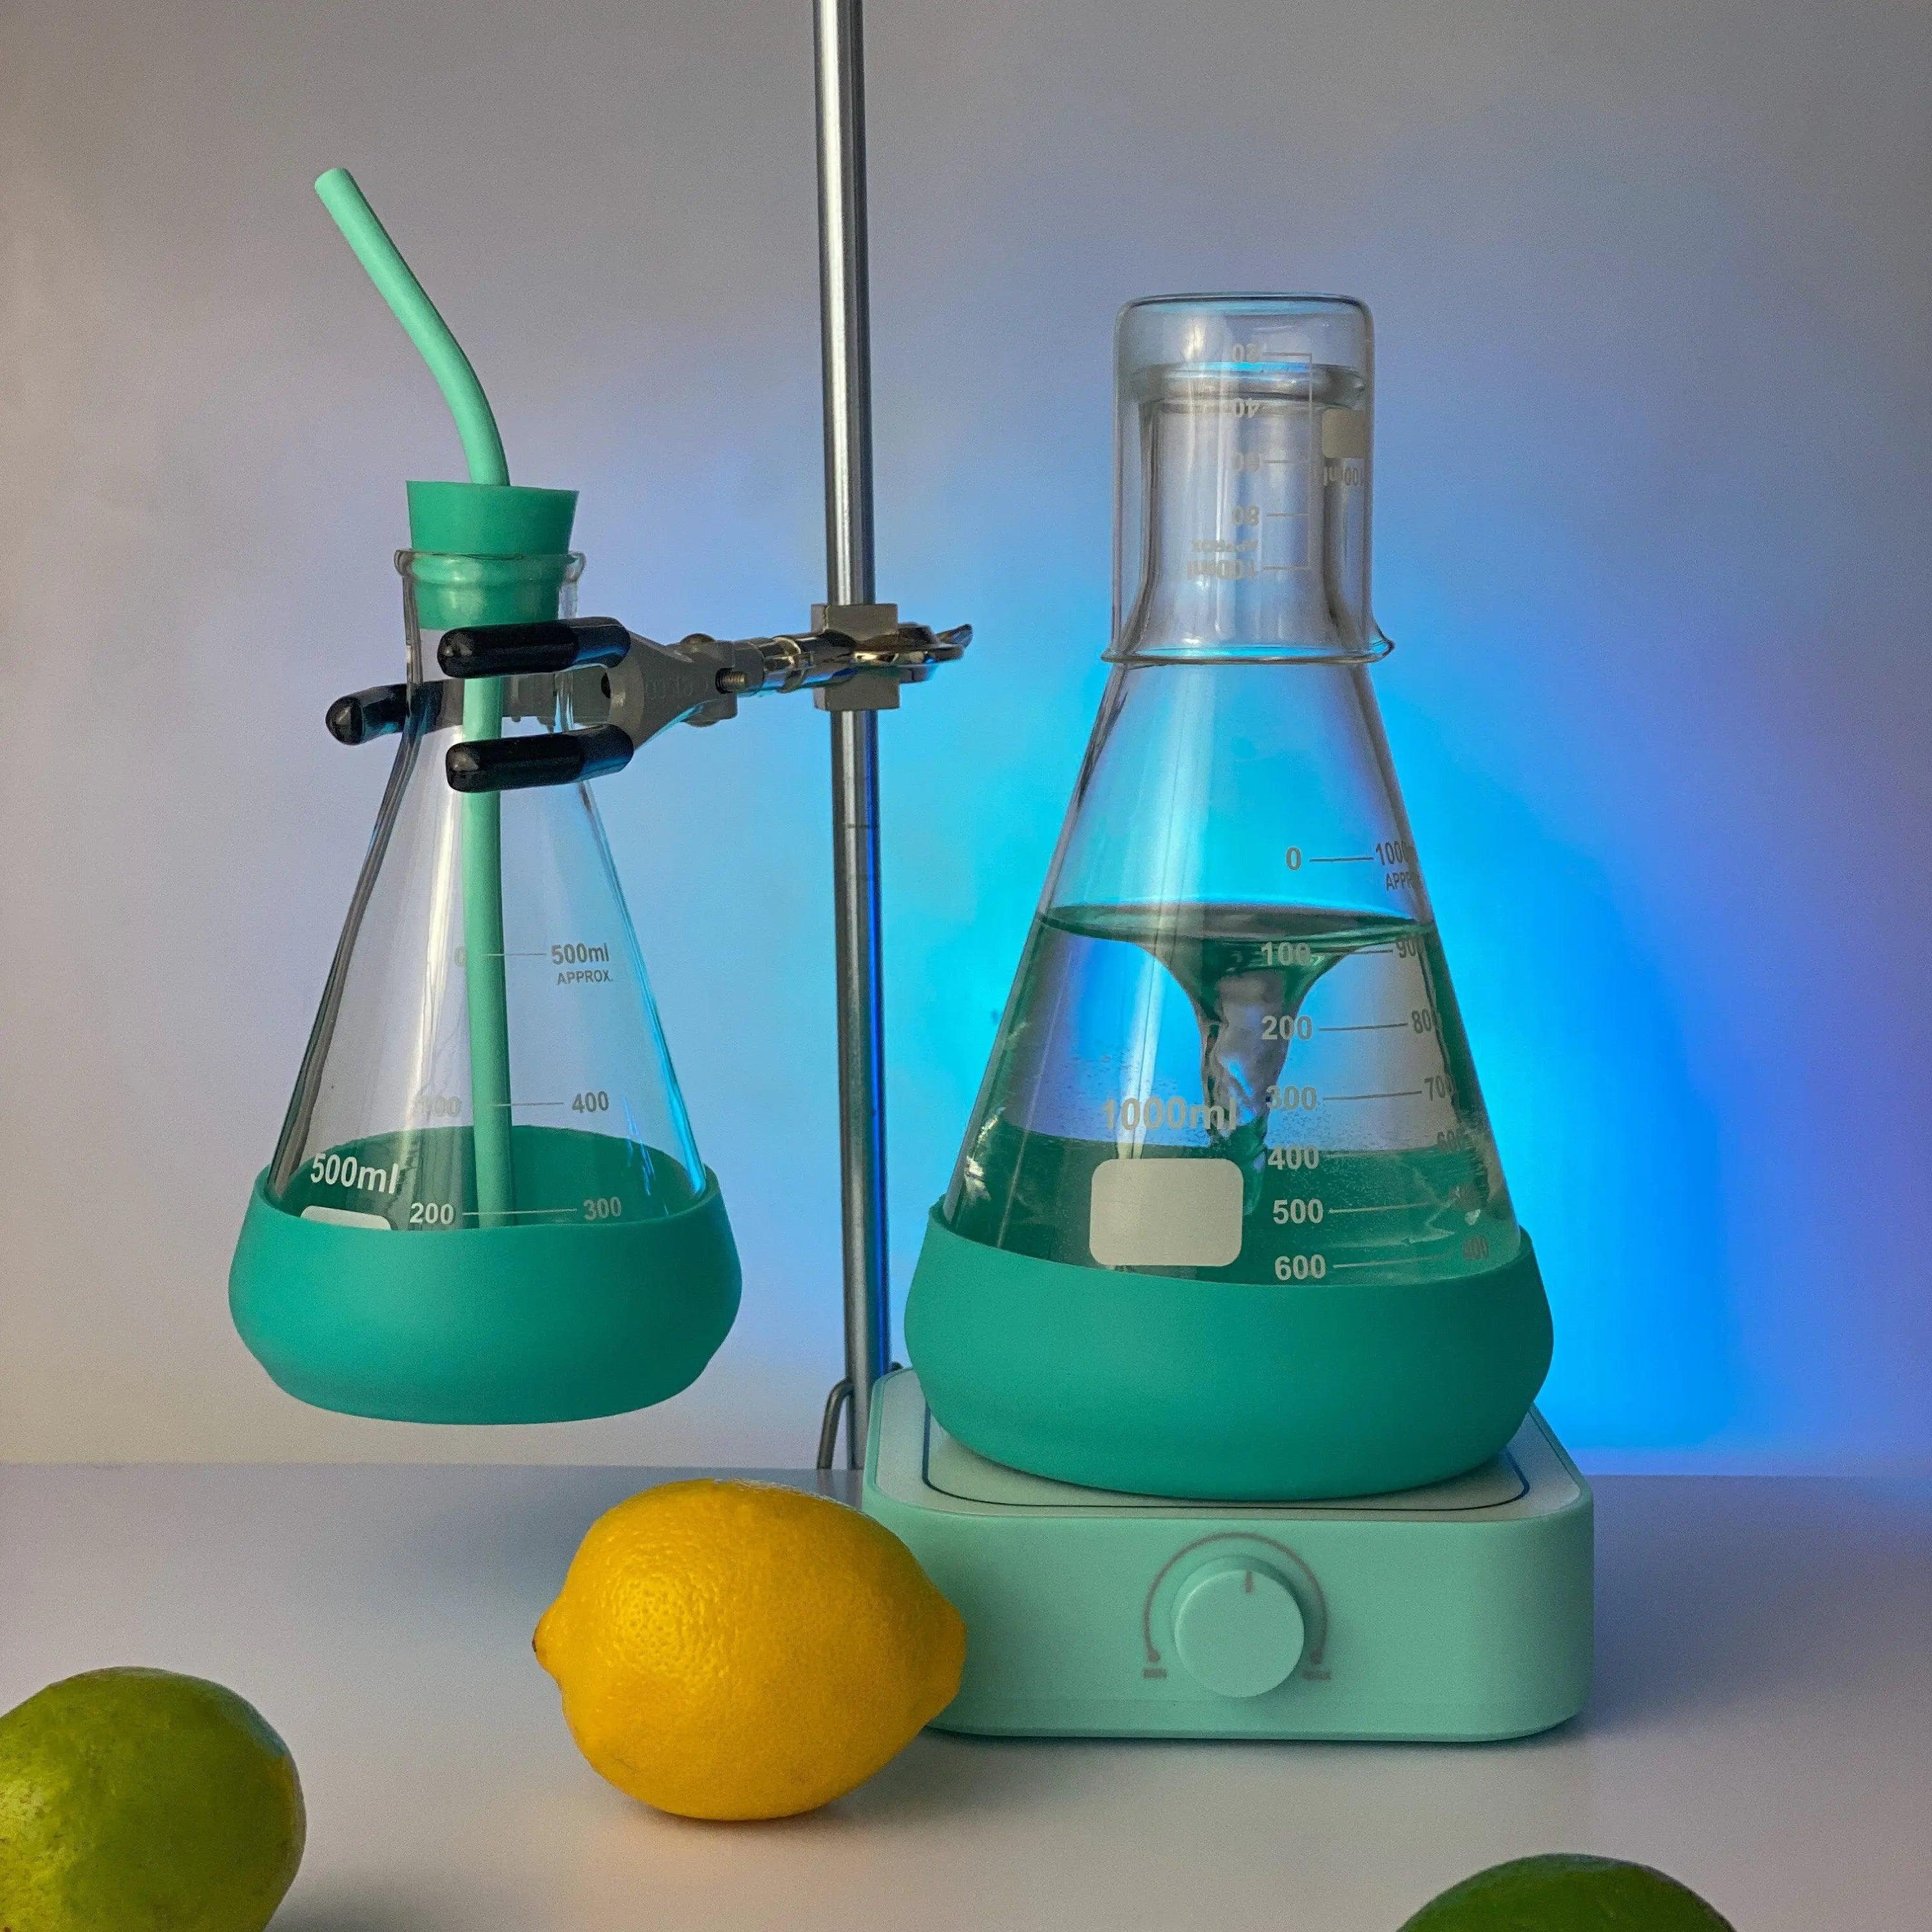 A scientific way to mix cocktails or other mixed drinks! This magnetic stir plate drink mixer will be the perfect unique gift for your favorite science lover.